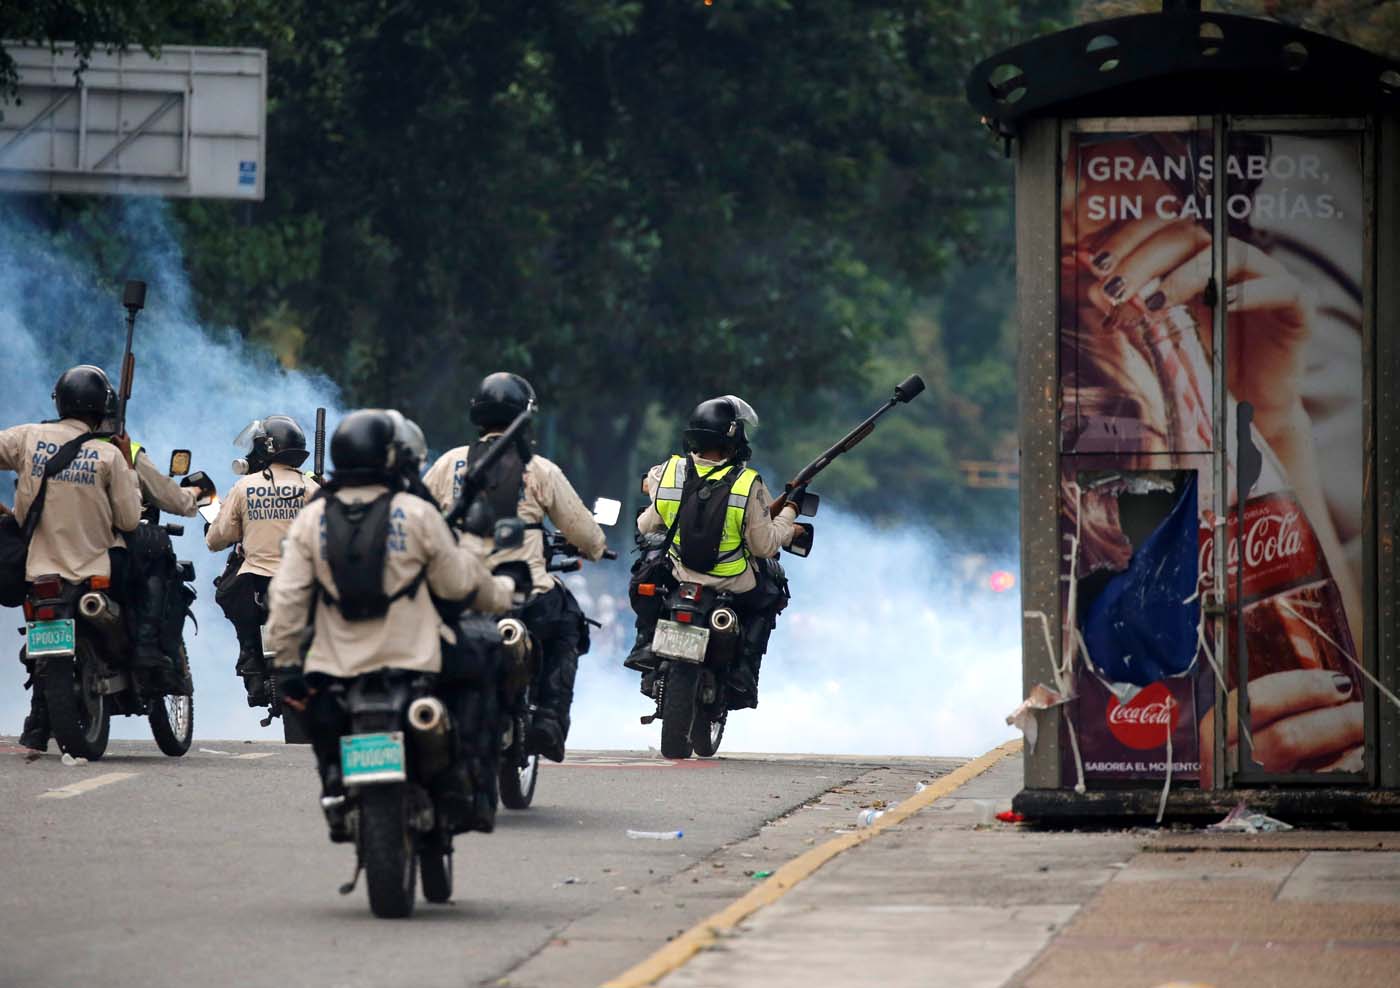 Riot police take positions during the so called "mother of all marches" against Venezuela's President Nicolas Maduro in Caracas, Venezuela, April 19, 2017. REUTERS/Carlos Garcia Rawlins